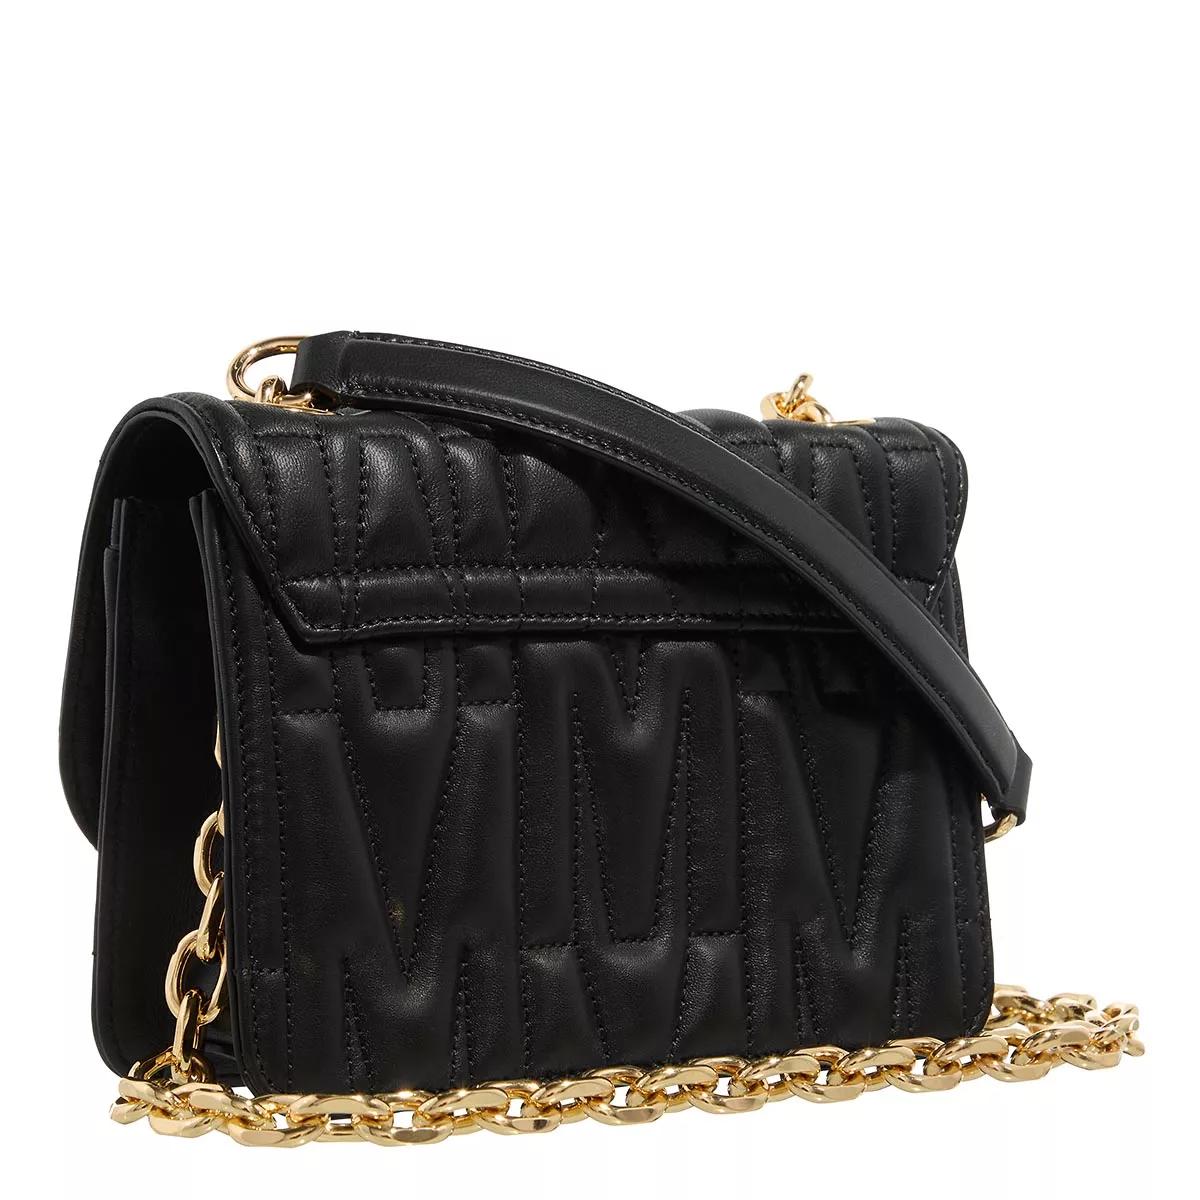 Moschino Crossbody bags "M" Group Quilted Shoulder Bag in zwart